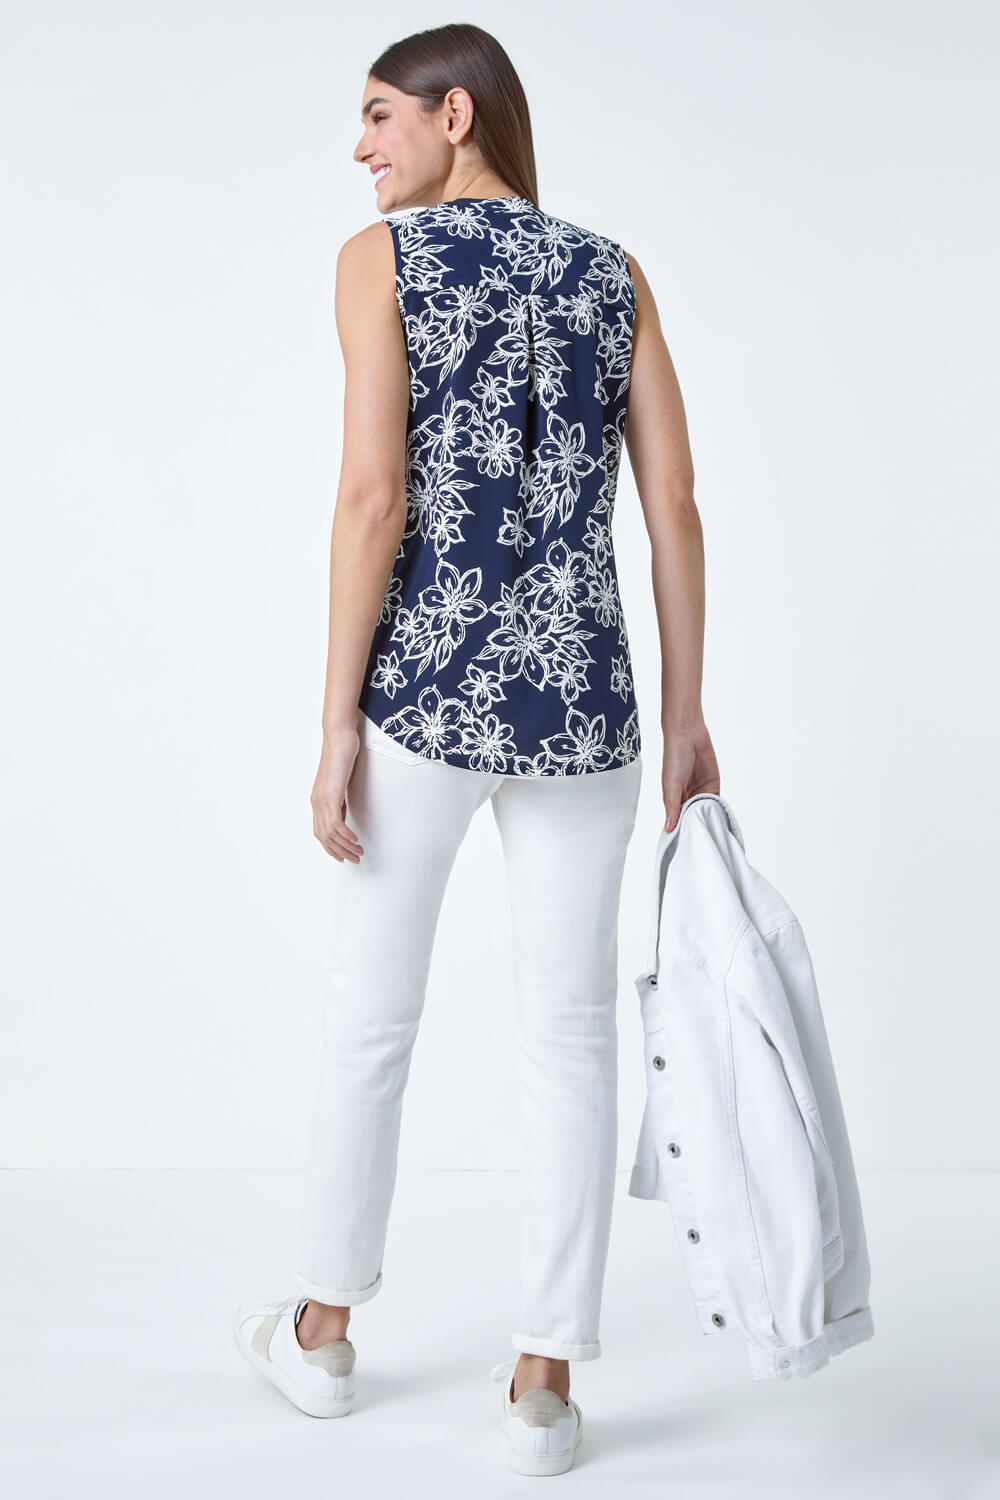 Navy  Sleeveless Floral Print Stretch Top, Image 3 of 5